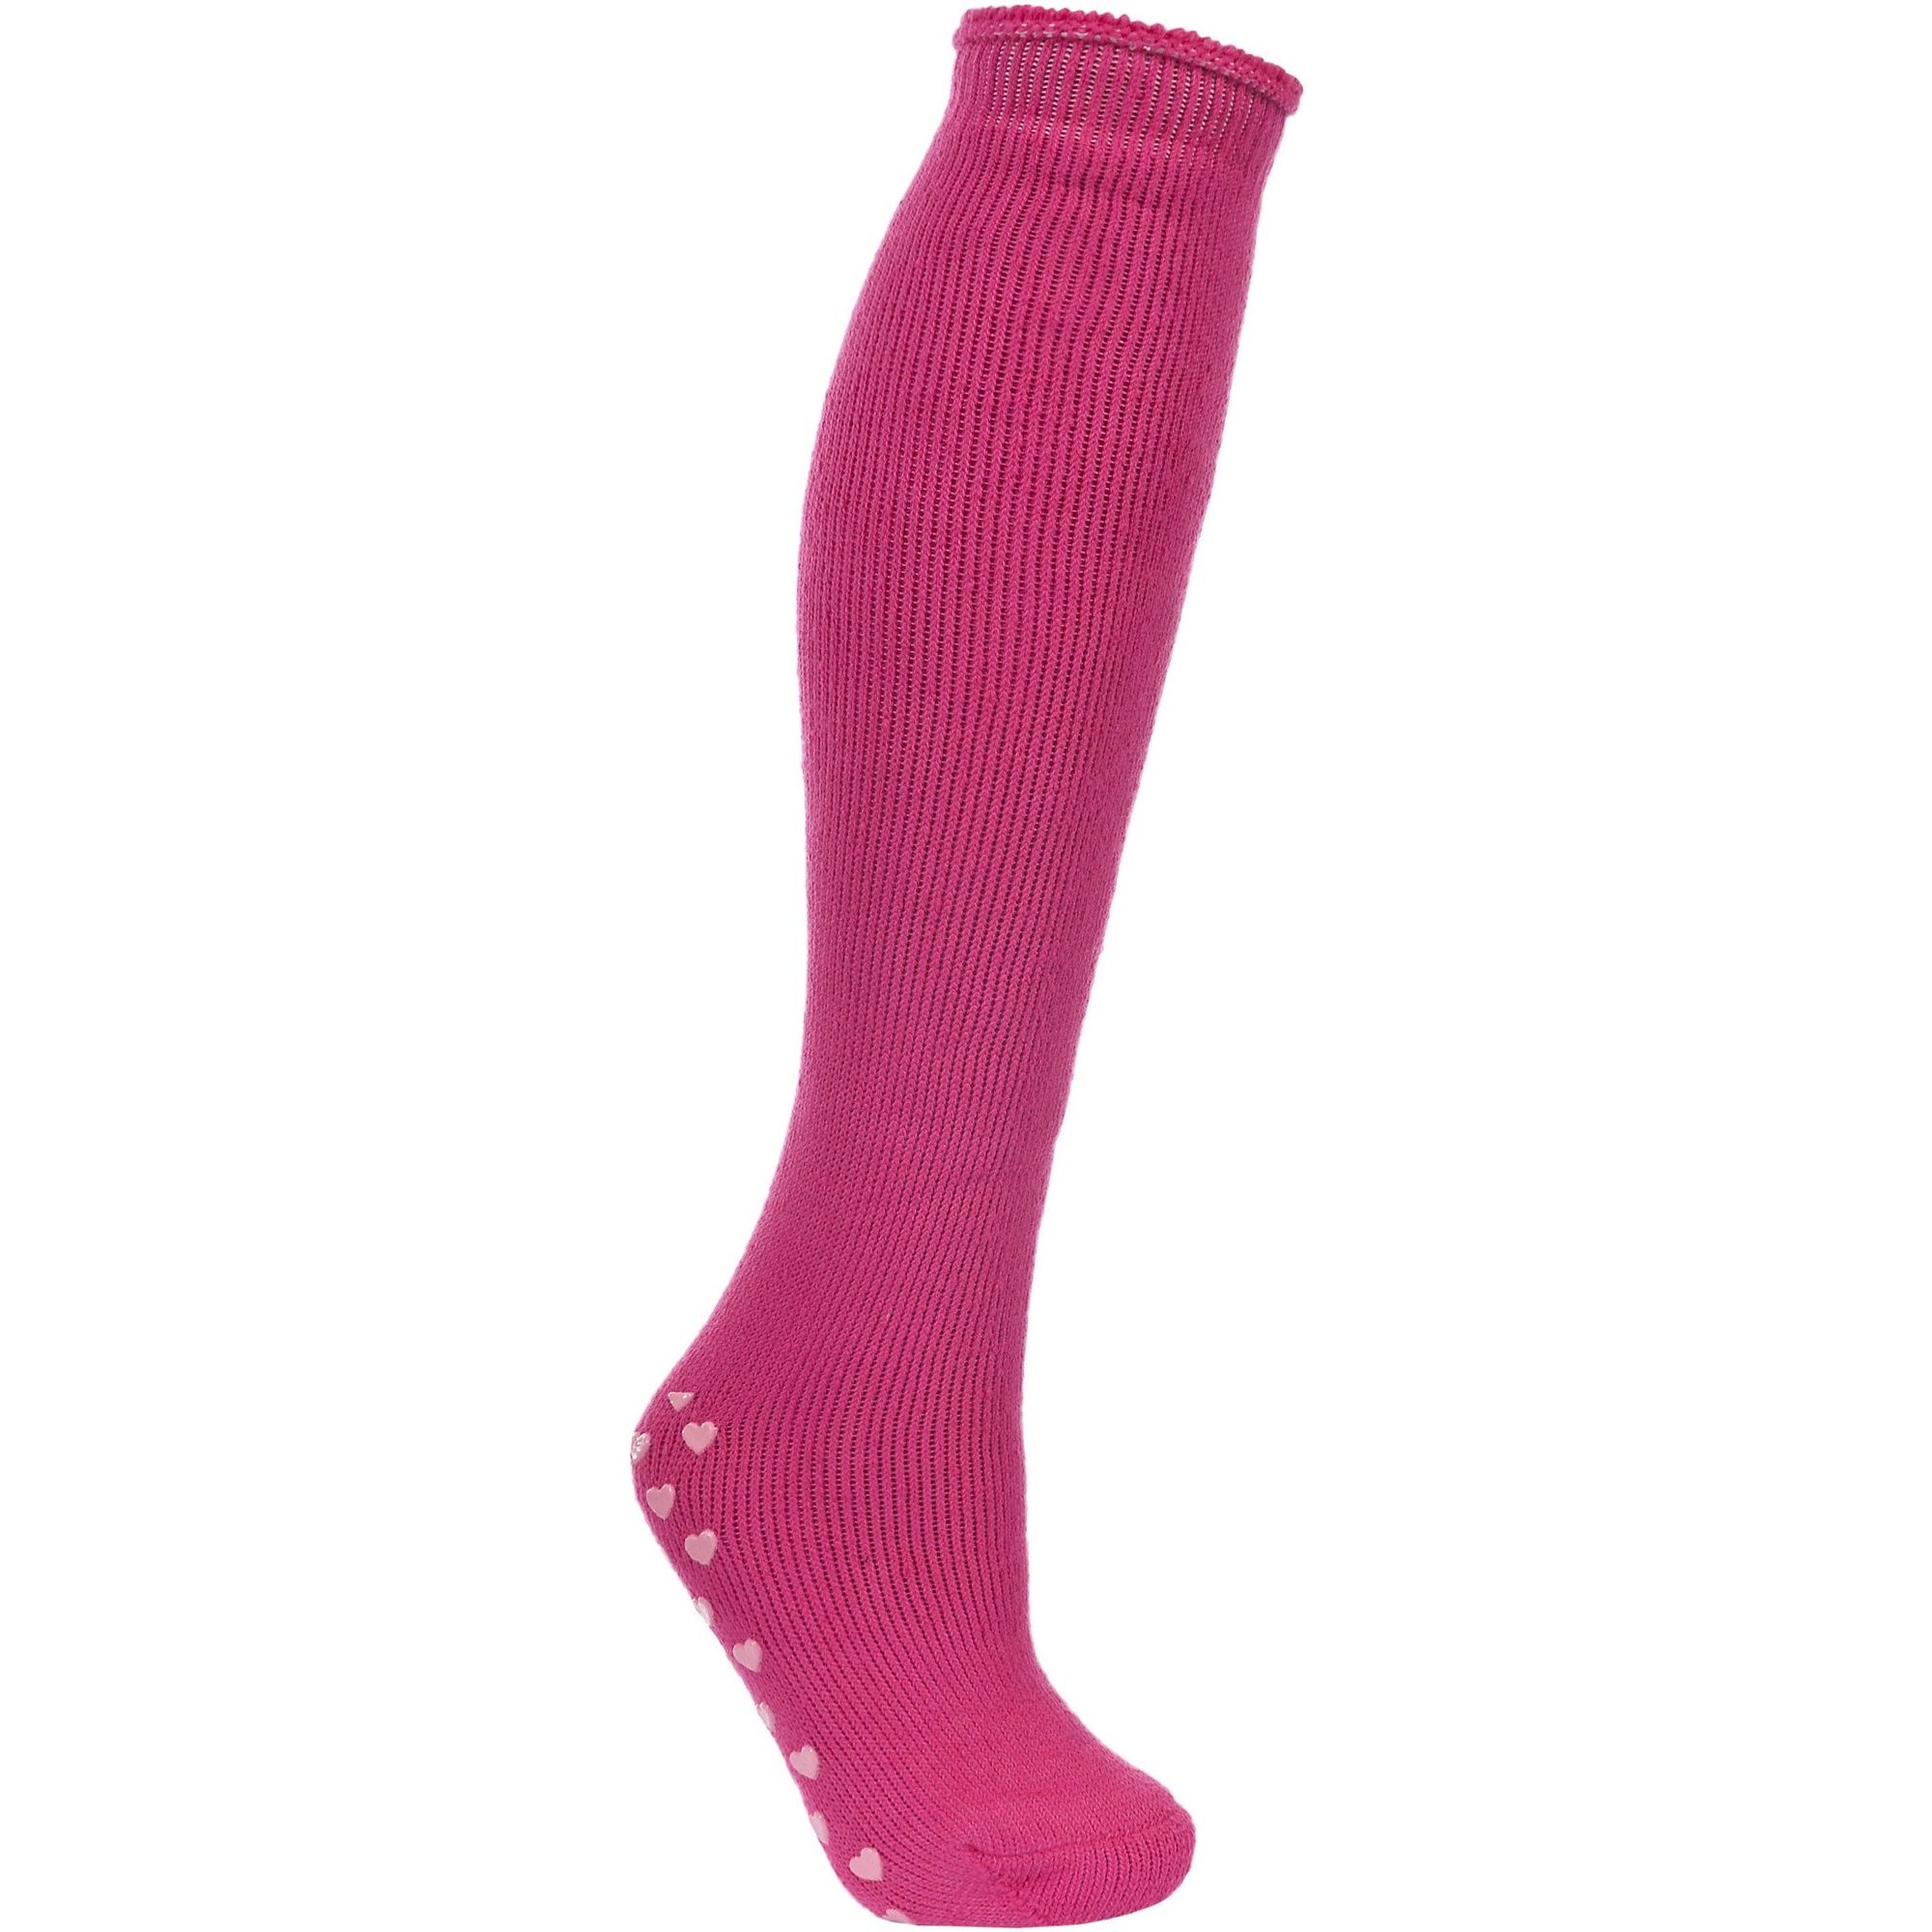 Womens ski socks with thick, knitted build and heart-shaped floor grippers. 91% Acrylic, 5% Polyamide, 3% Polyester, 1% Elastane.